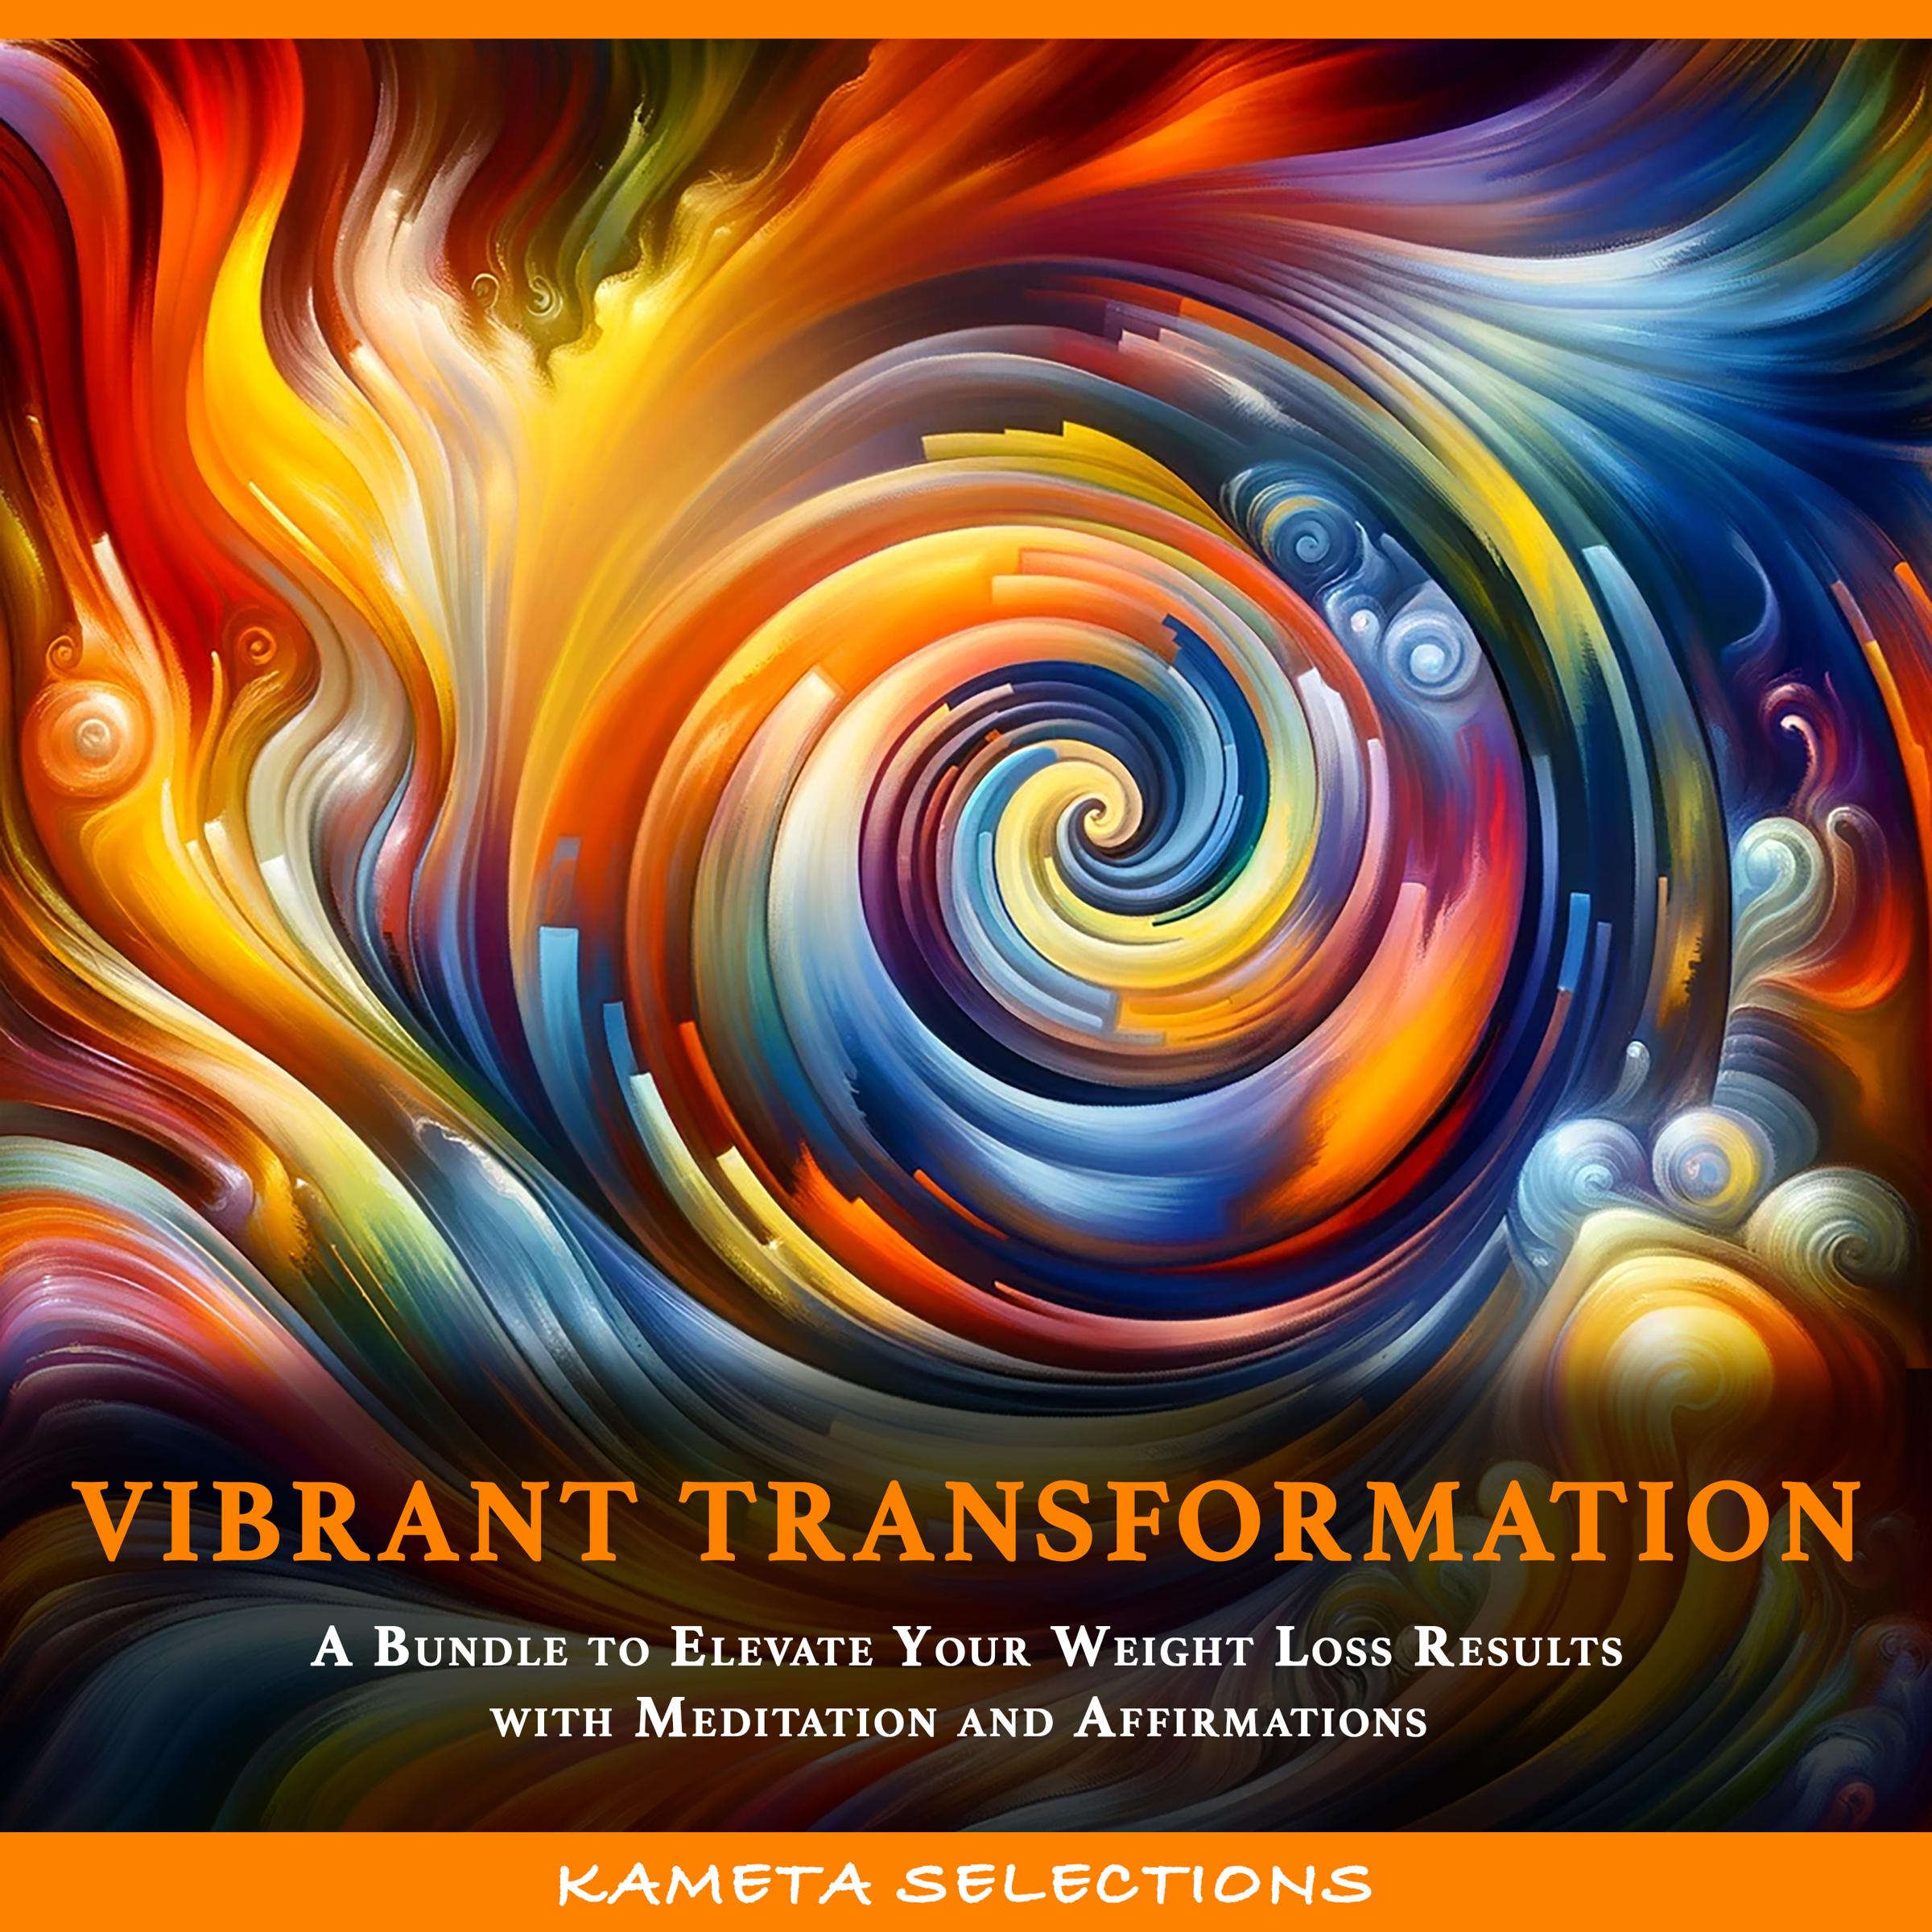 Vibrant Transformation: A Bundle to Elevate Your Weight Loss Results with Meditation and Affirmations